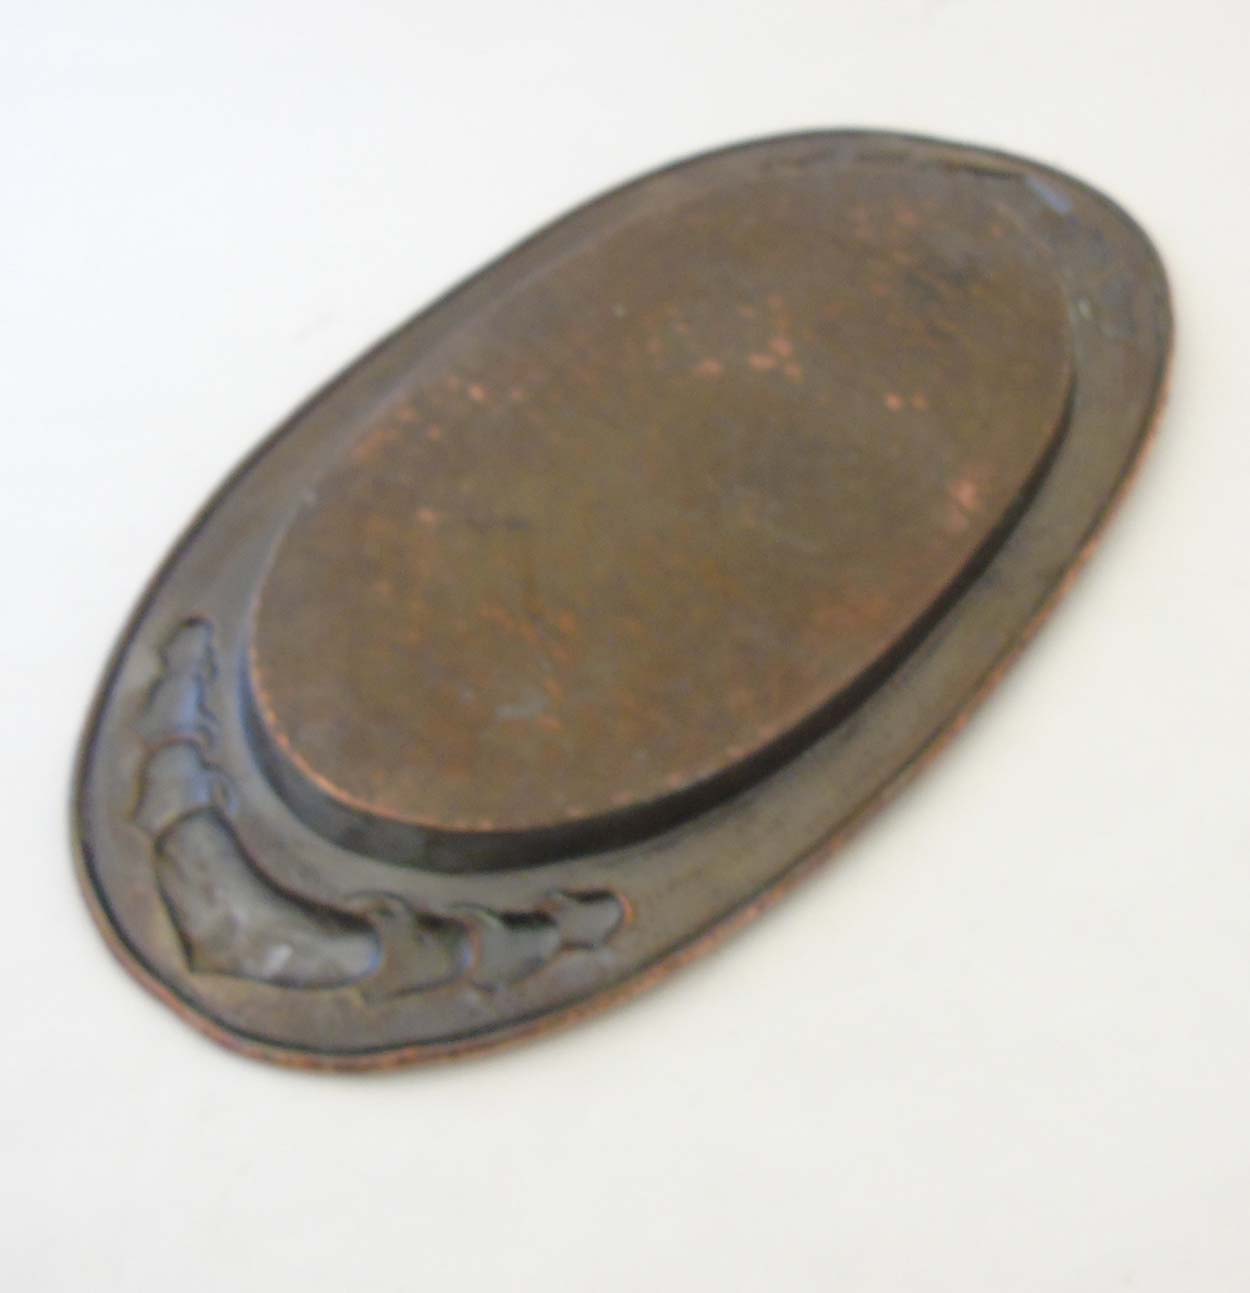 Art and Crafts Decorative metalware : An embossed and plannished large oval butlers tray with heart - Image 6 of 7